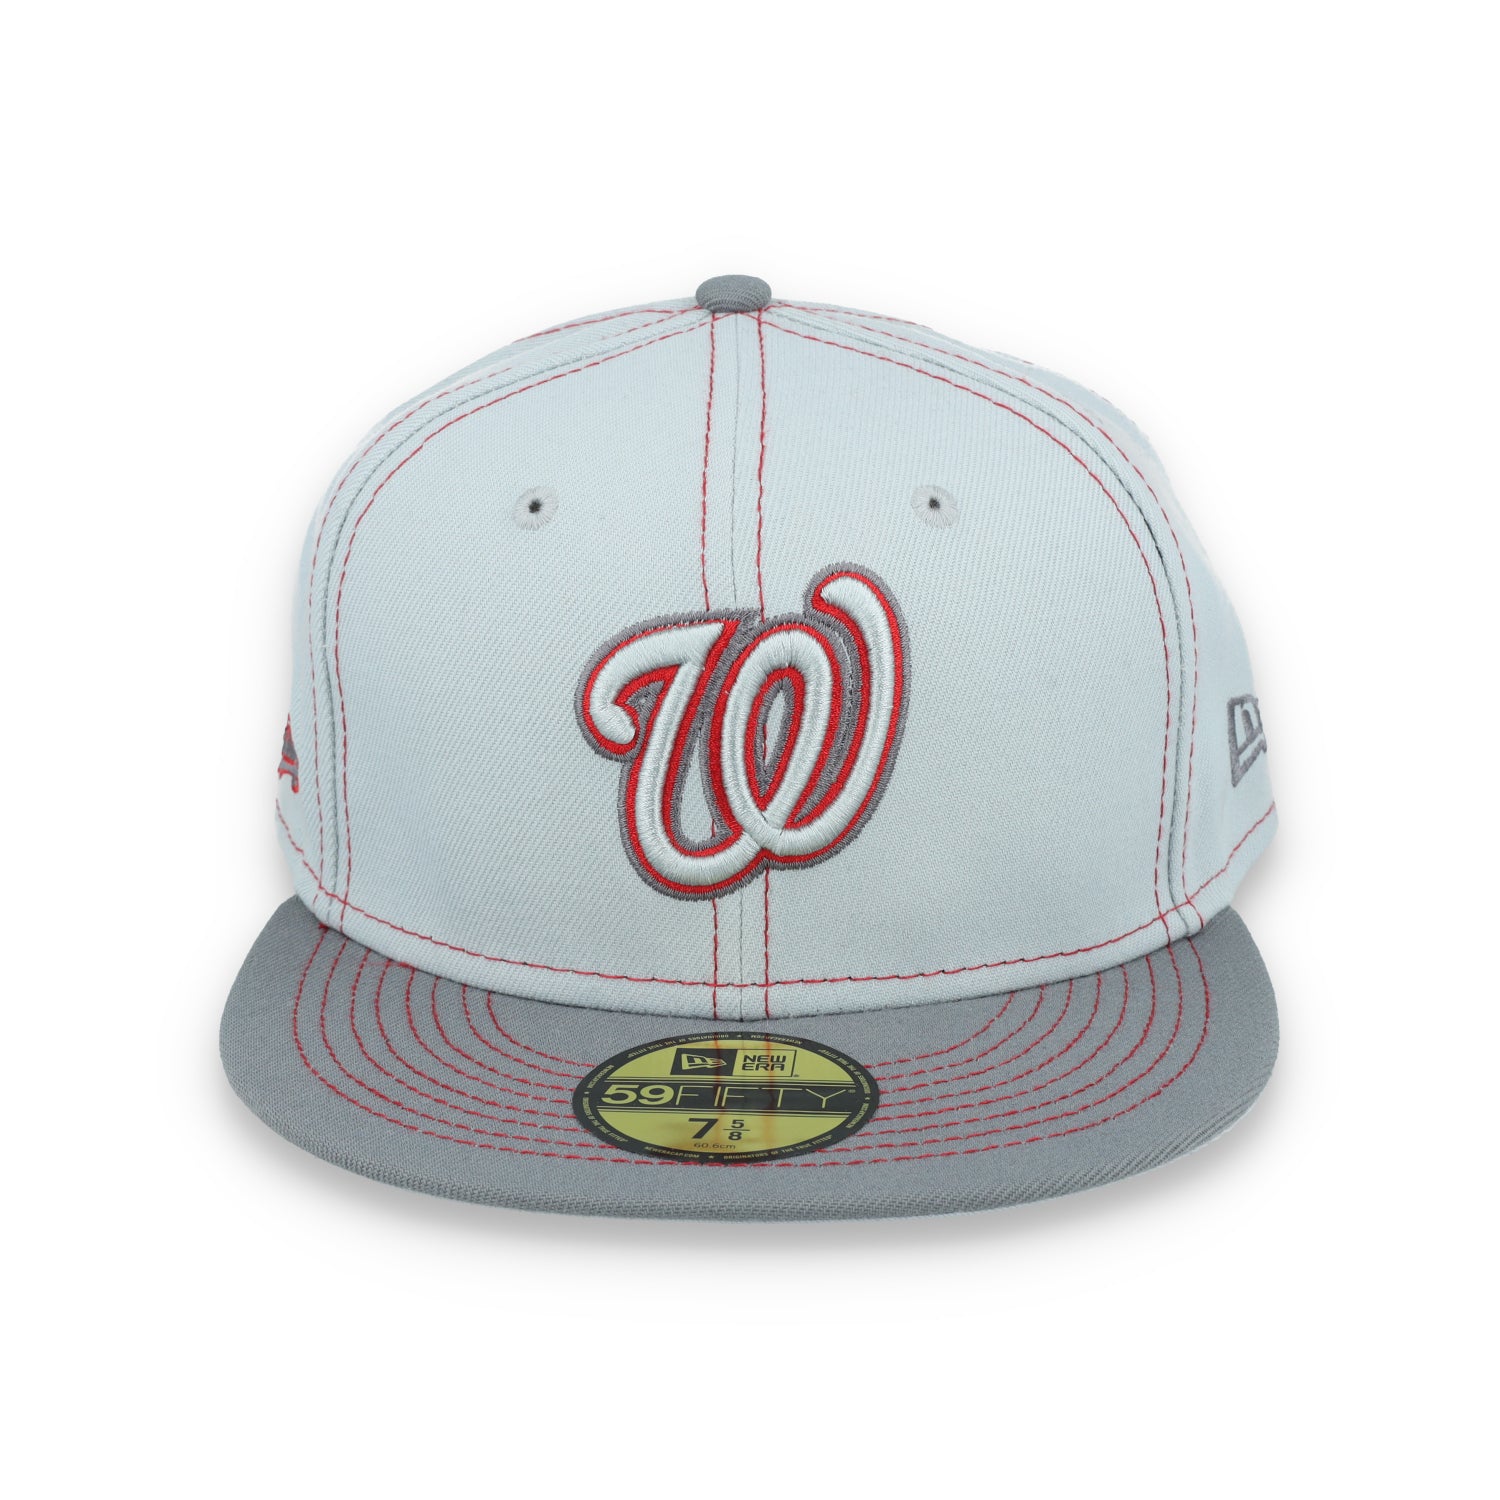 New Era Washington Nationals Gray Pop 59FIFTY Fitted Hat- Gray